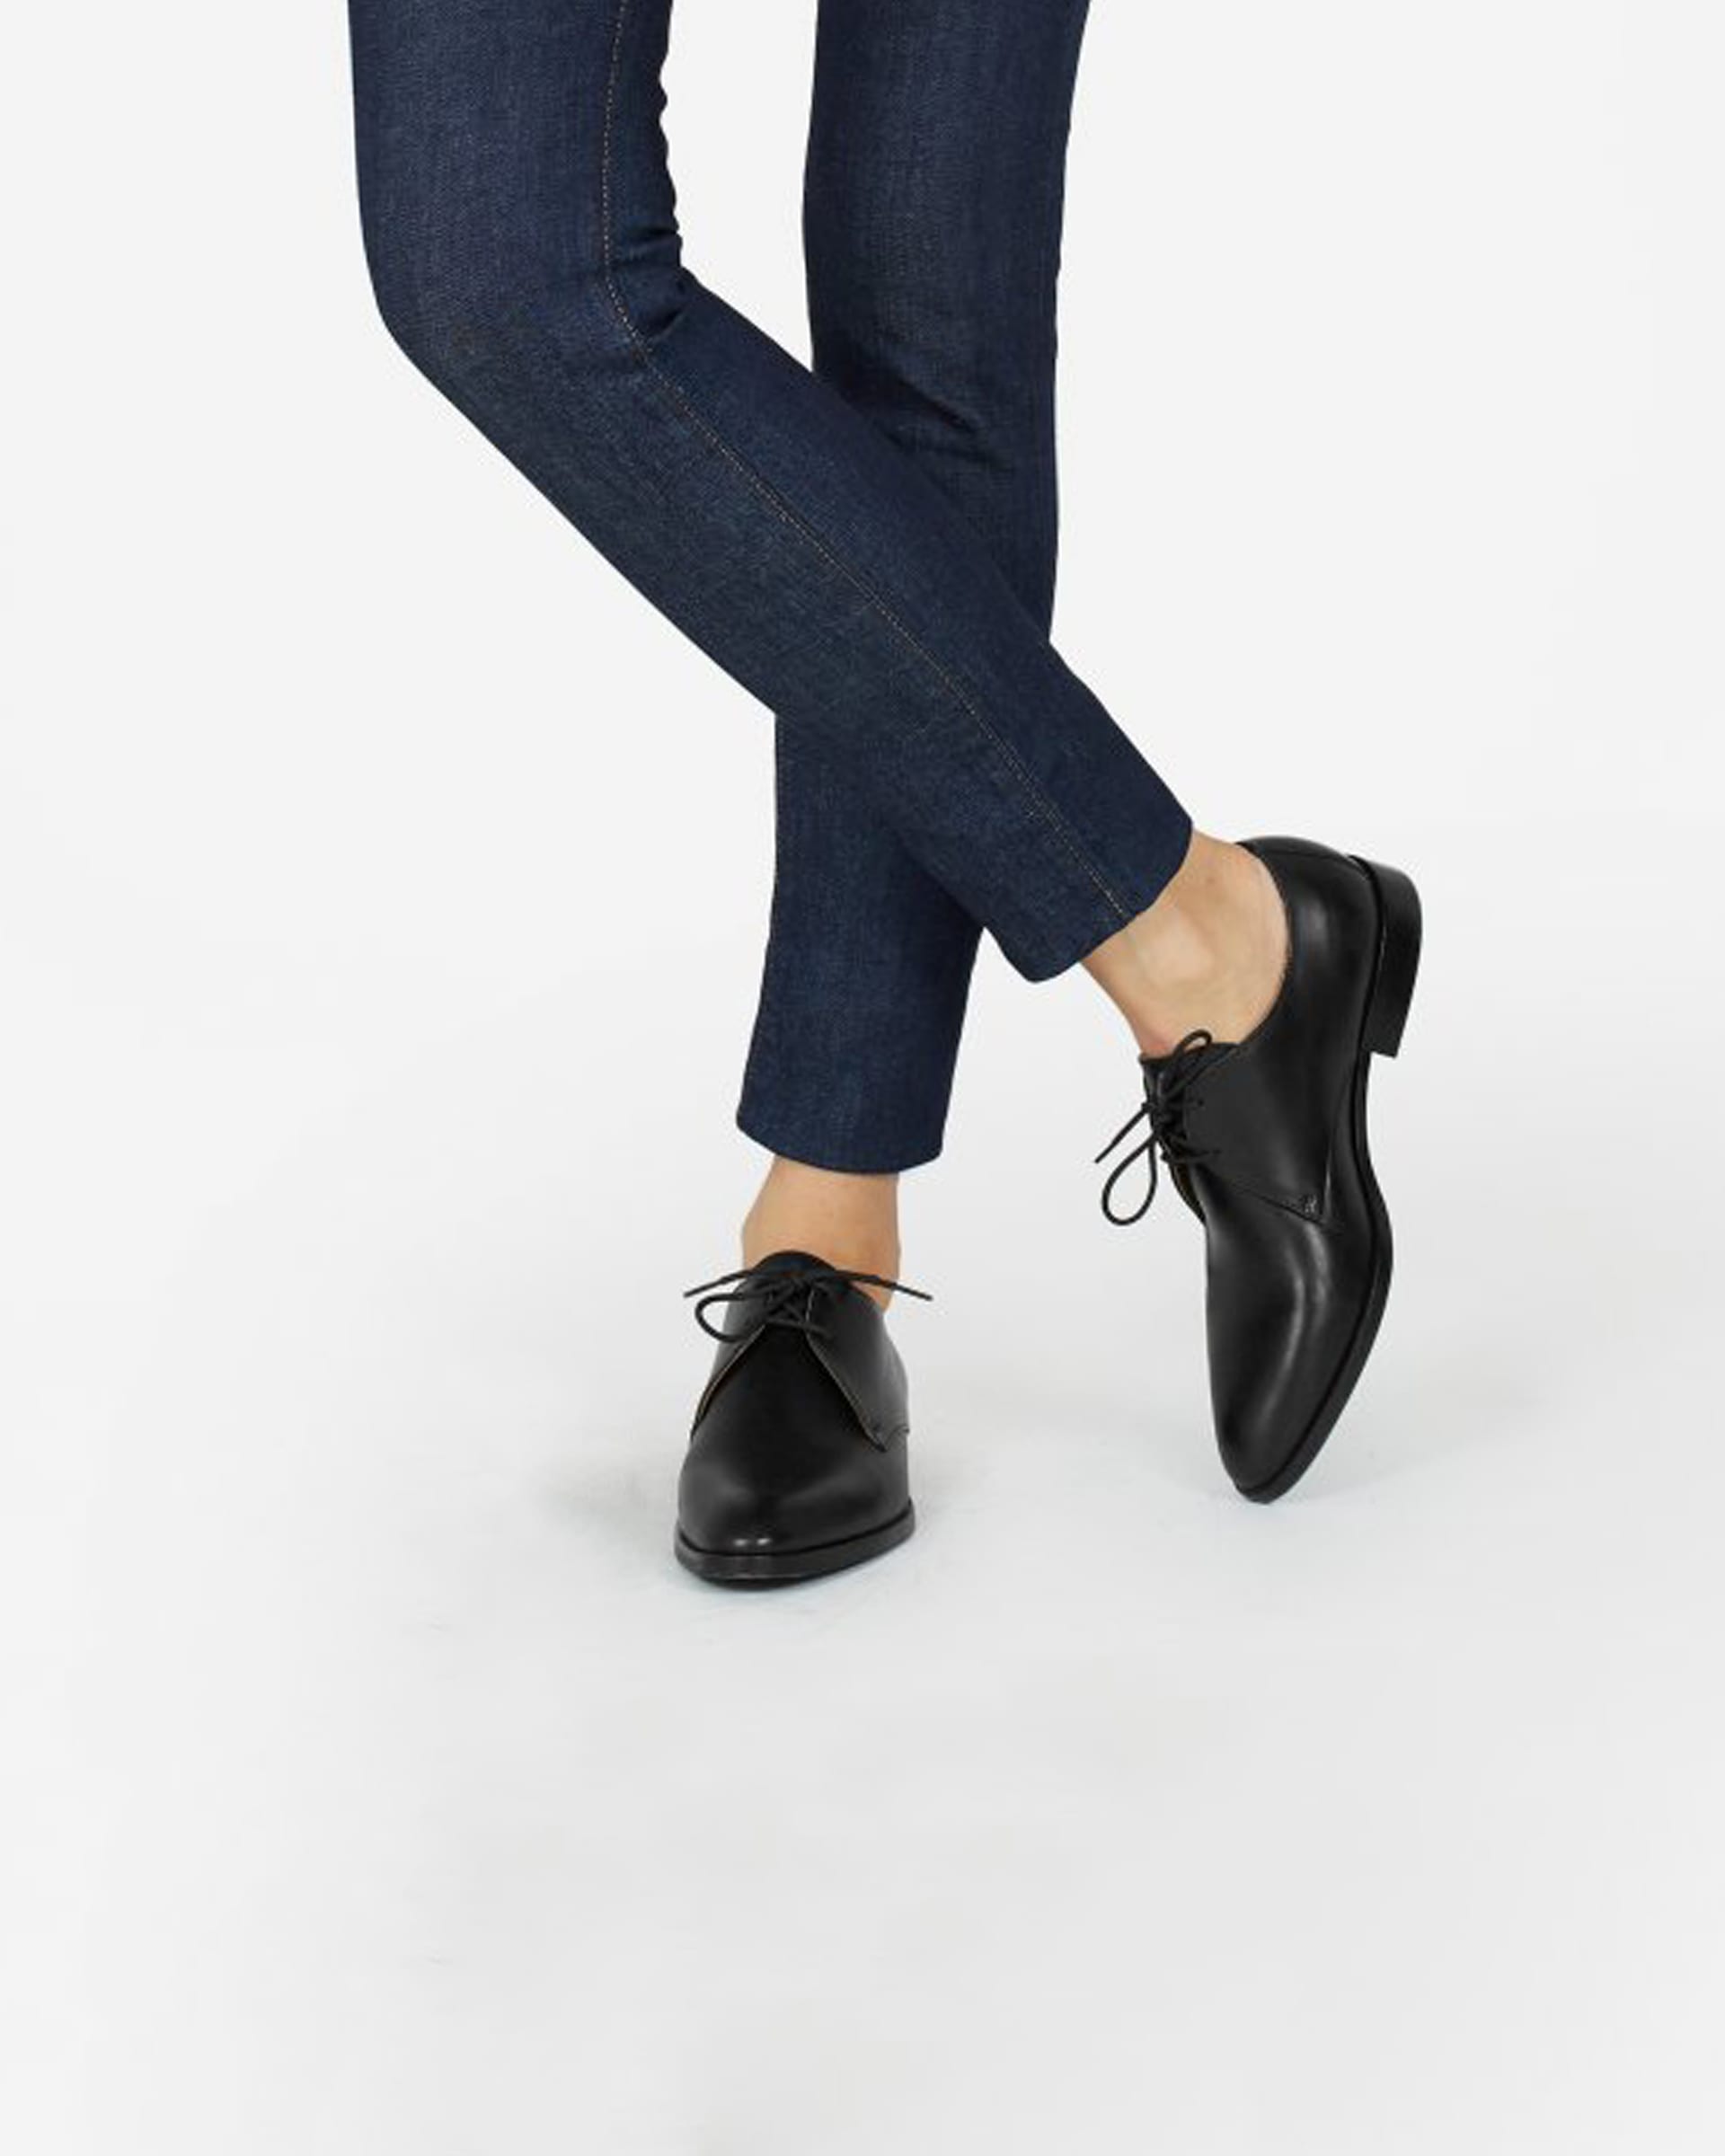 everlane leather shoes